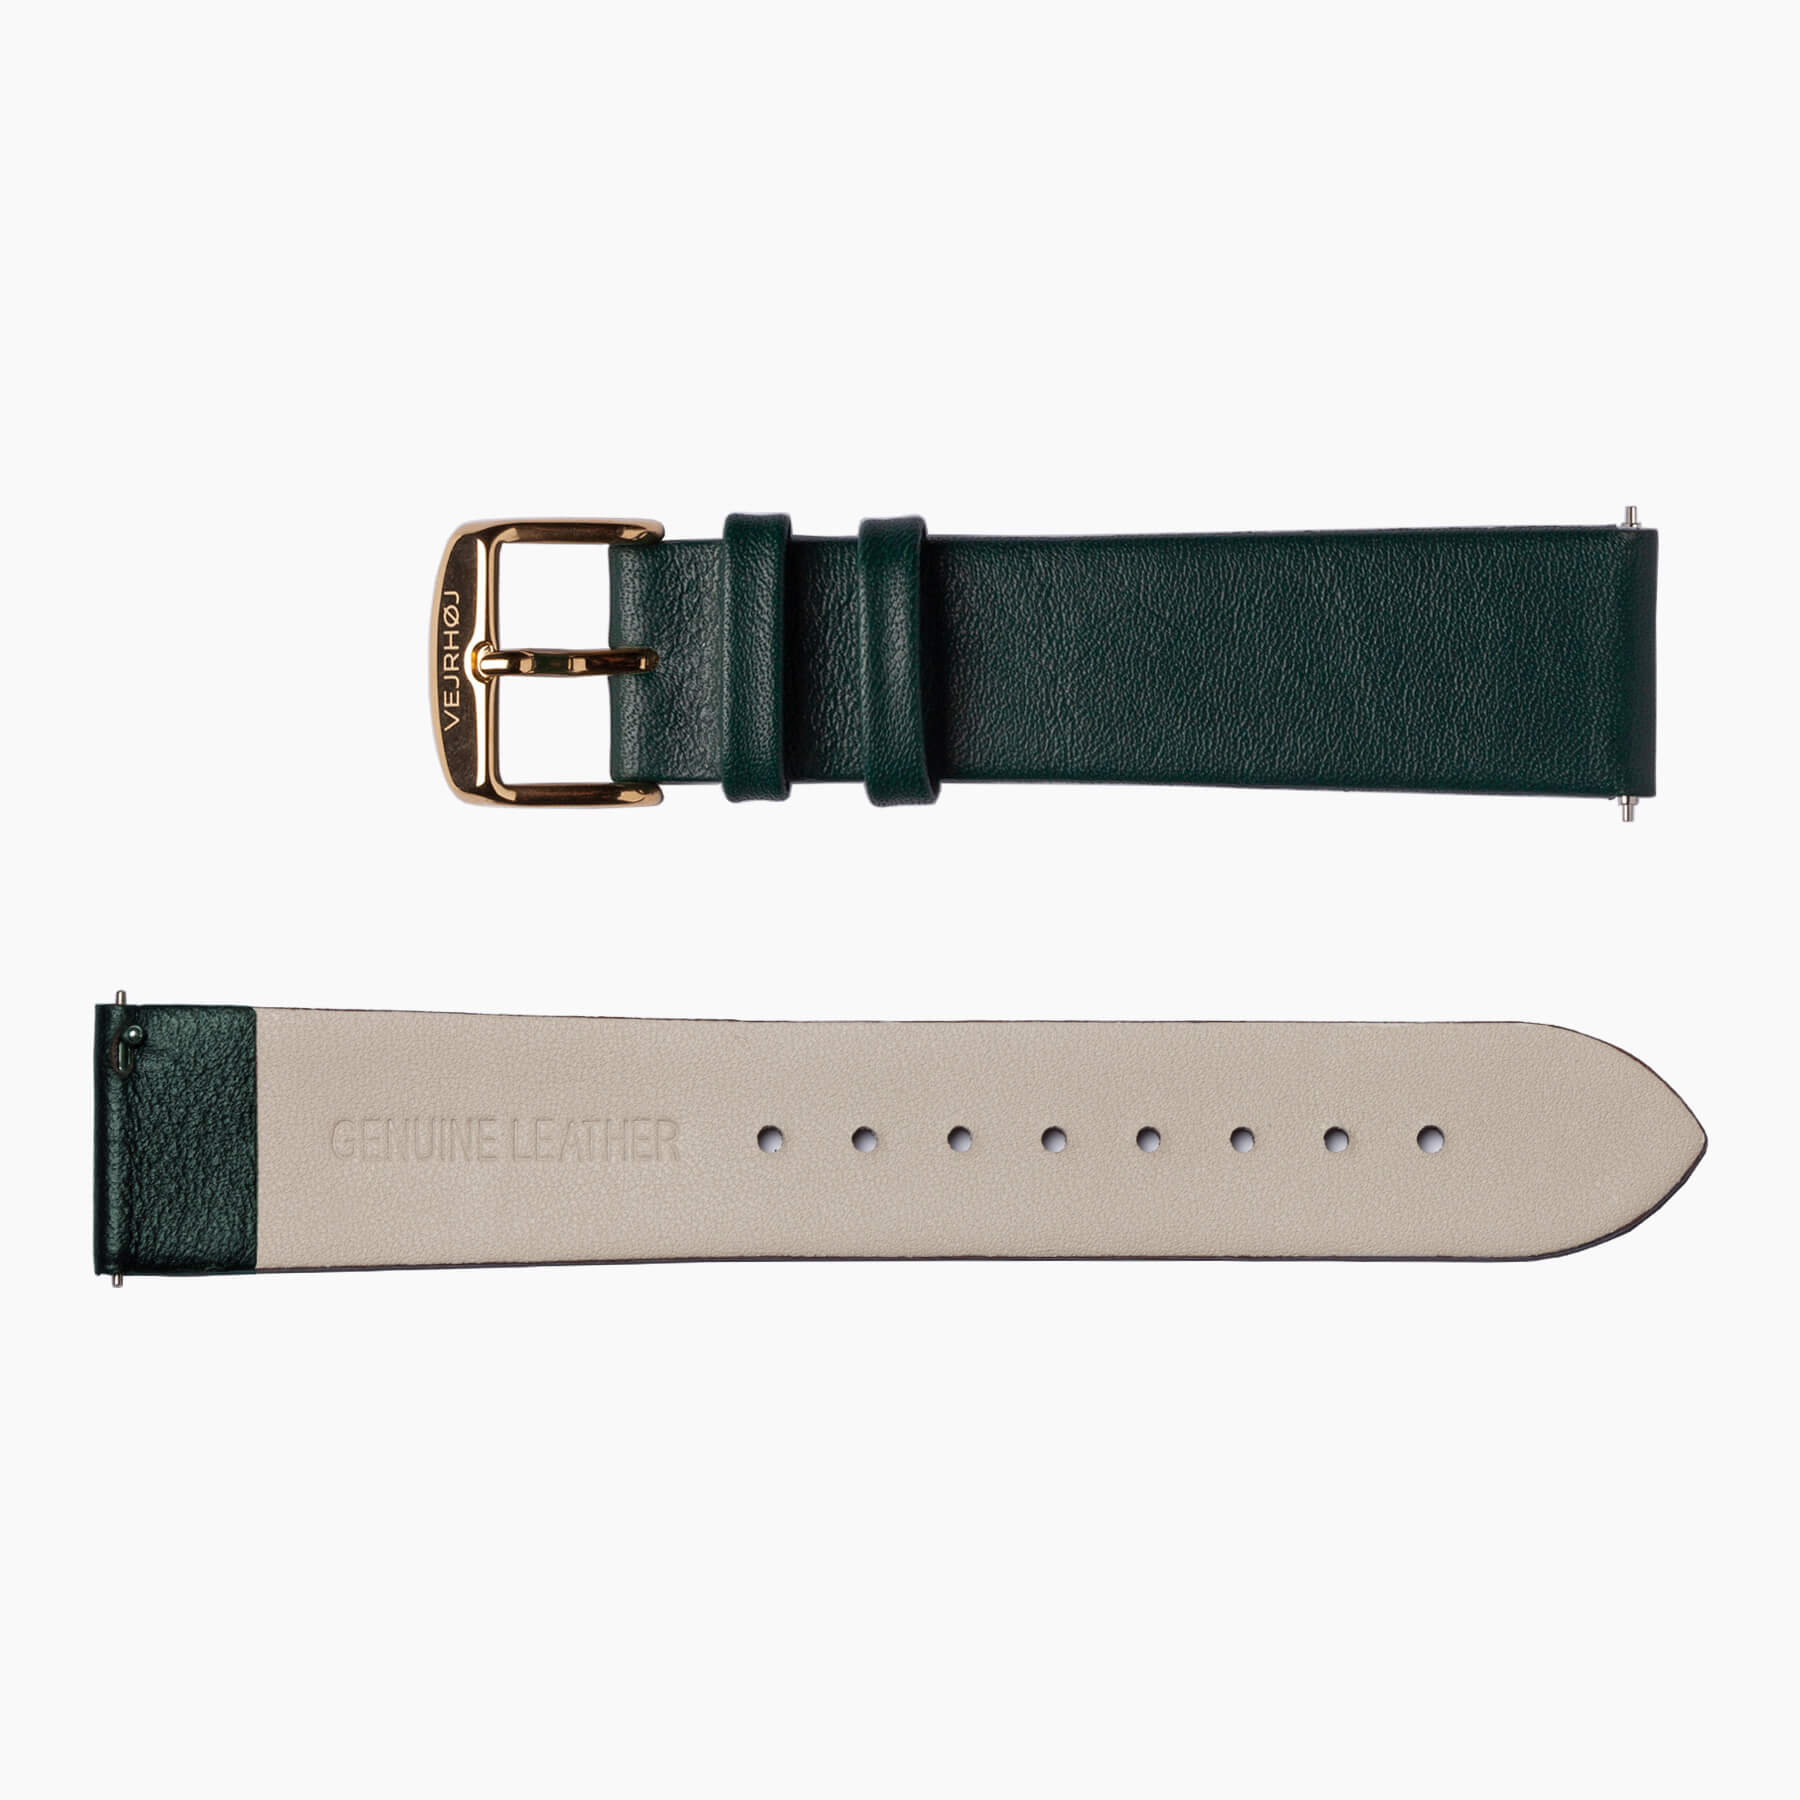 Green strap with gold buckle